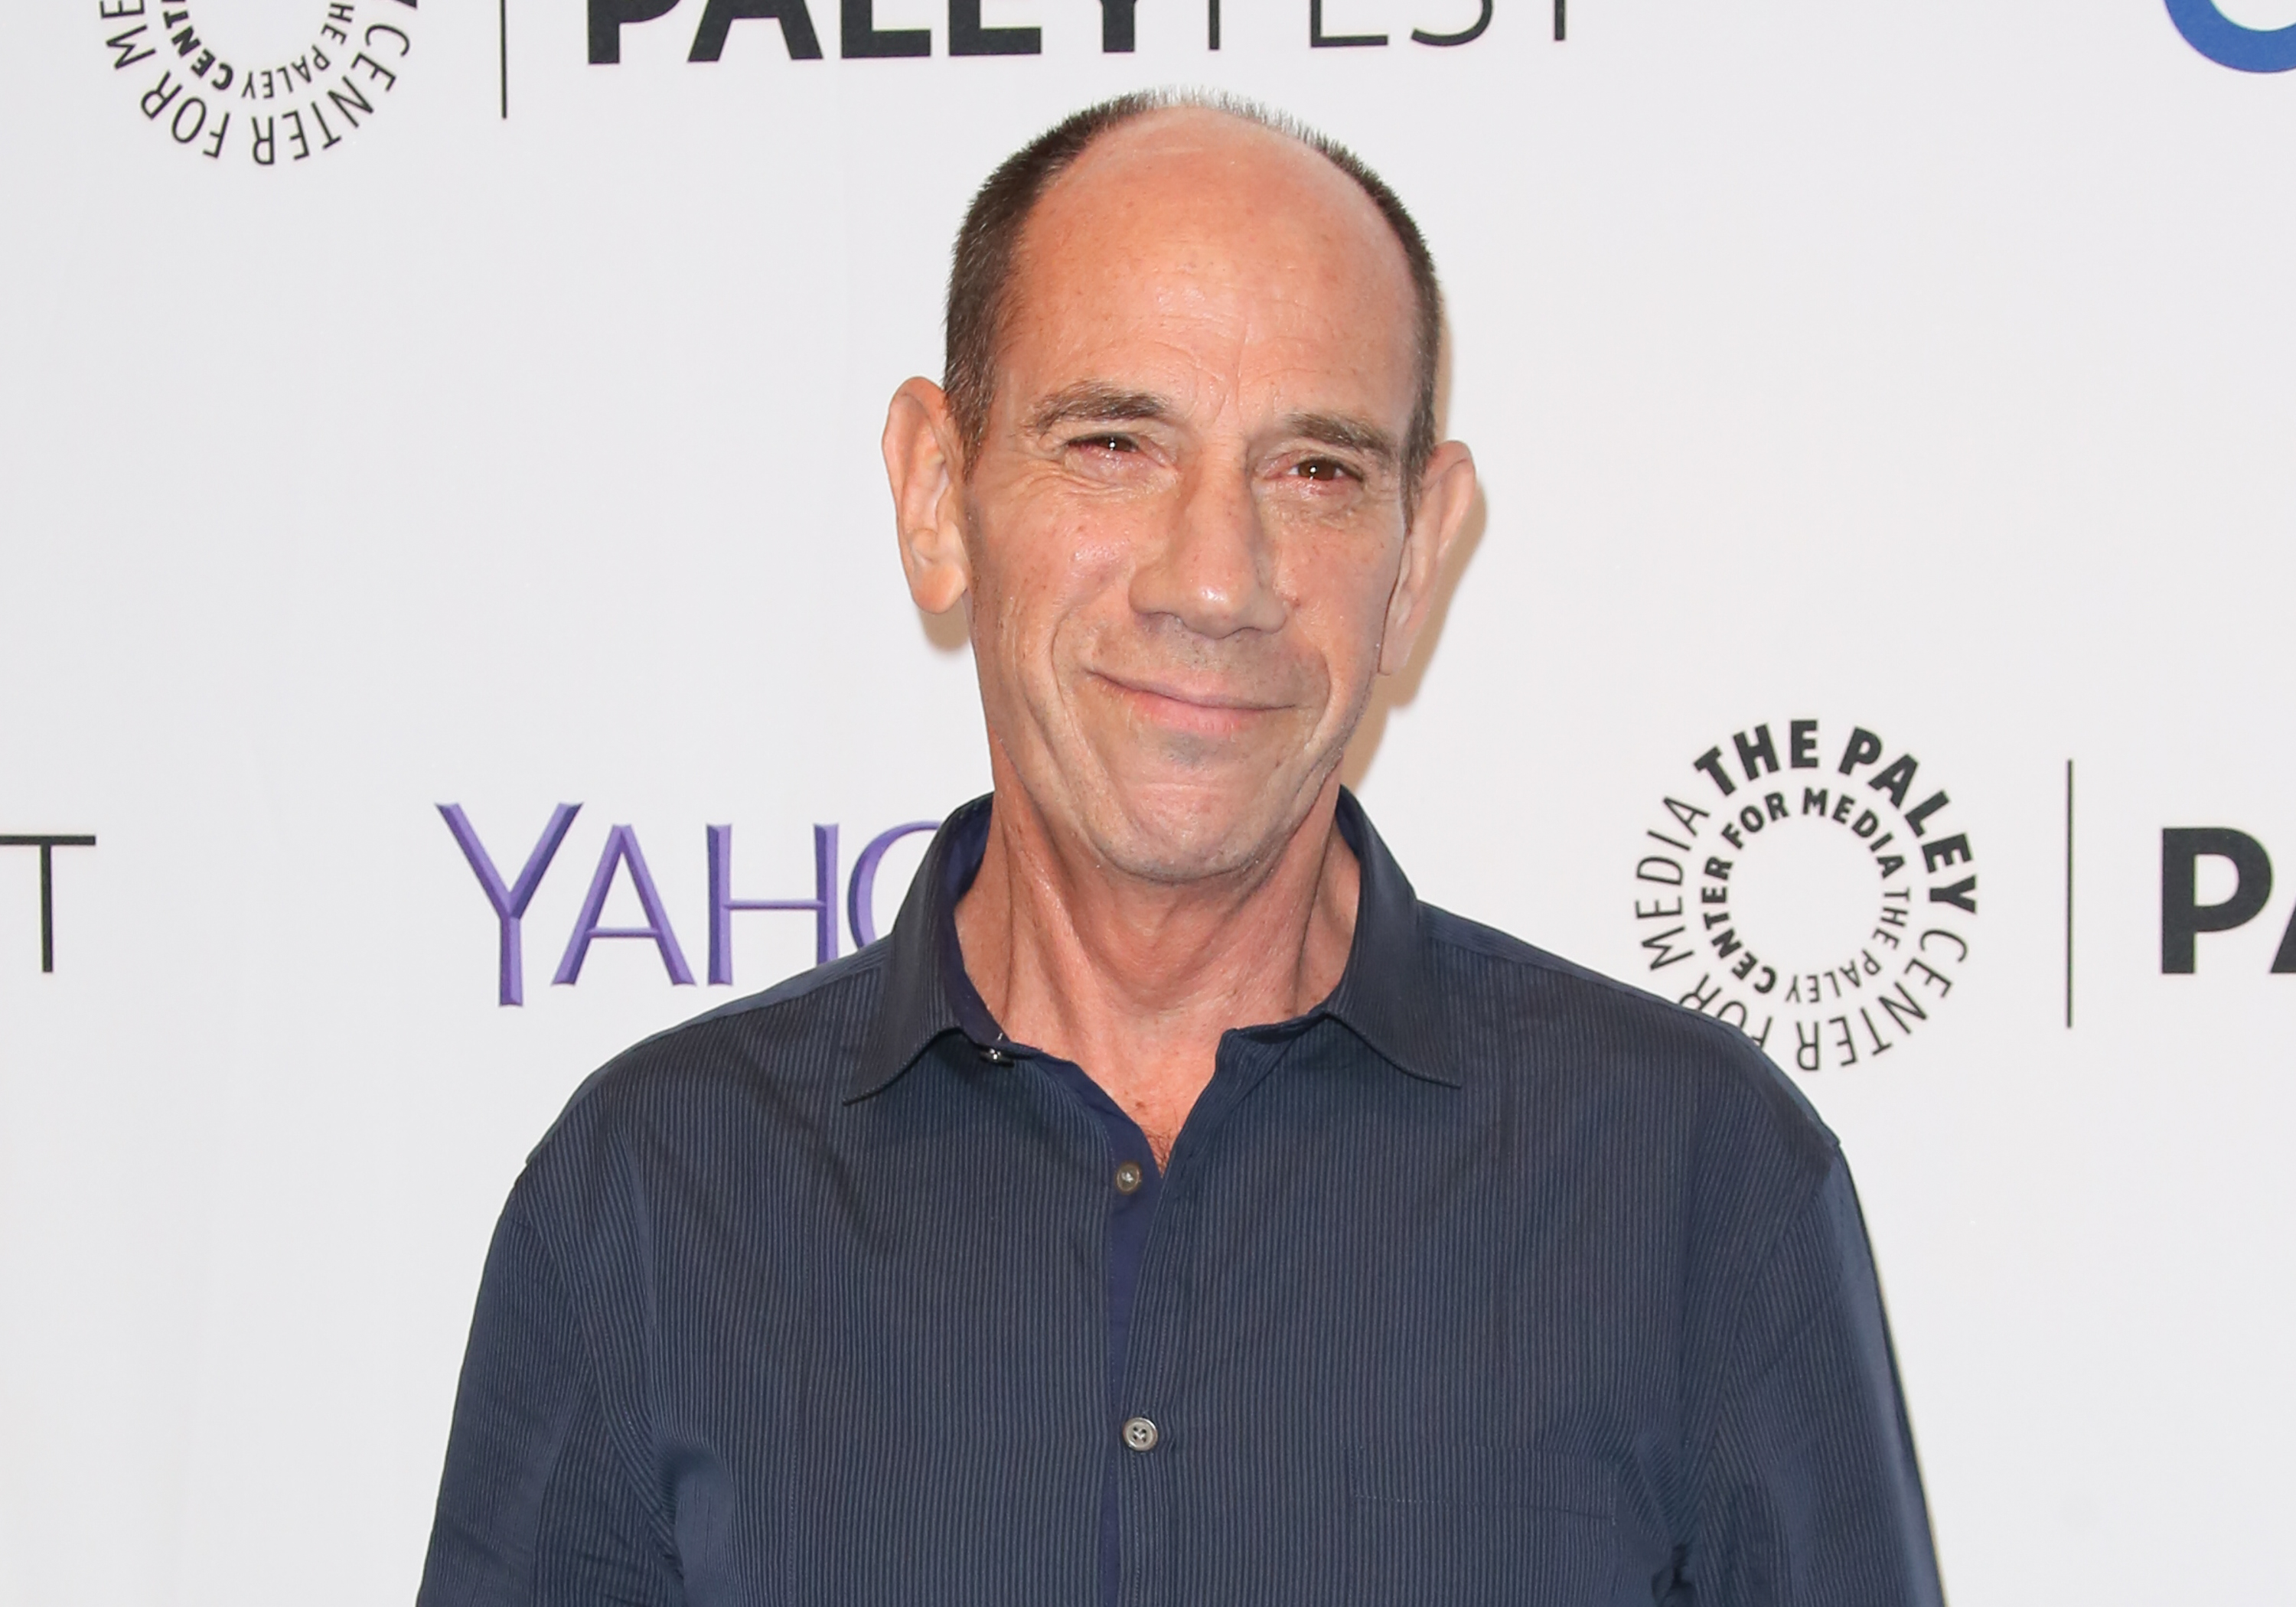 Actor Miguel Ferrer attends the PaleyFest 2015 fall TV preview of "NCIS: Los Angeles" at The Paley Center for Media on September 11, 2015 in Beverly Hills, California. (Paul Archuleta&mdash;FilmMagic/Getty Images)